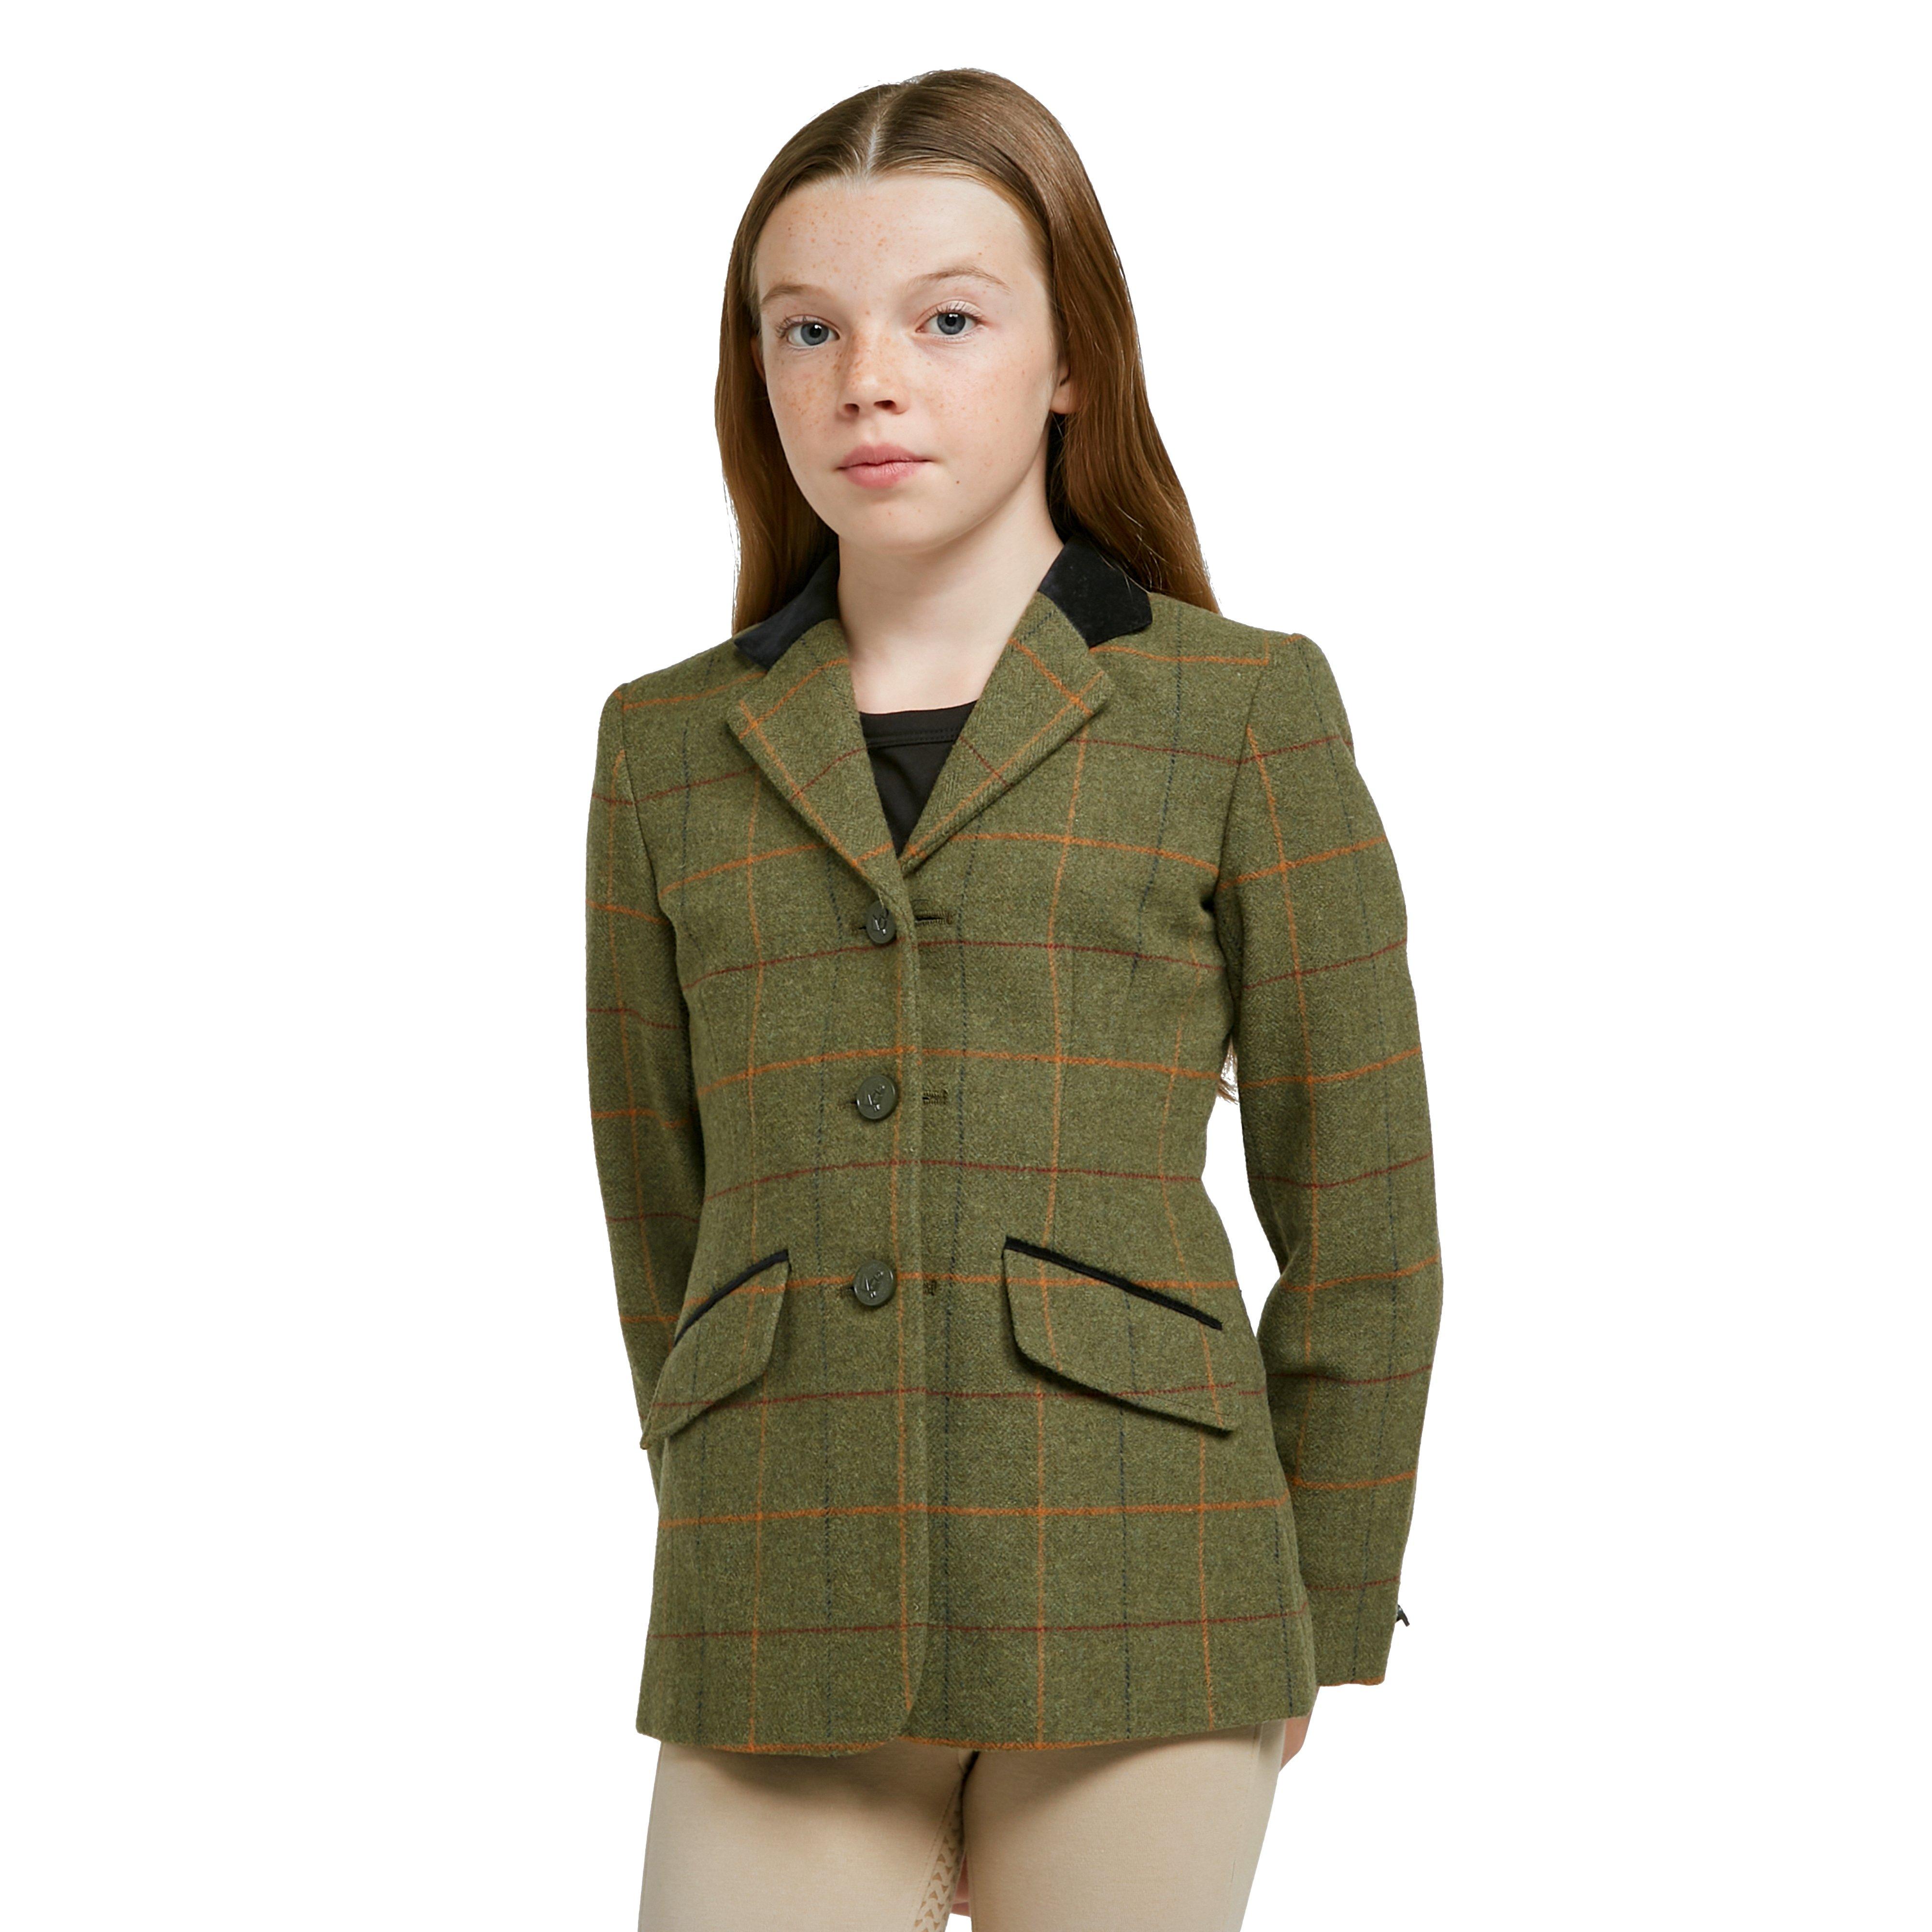 Childs Saratoga Tweed Jacket Red/Yellow/Blue Check